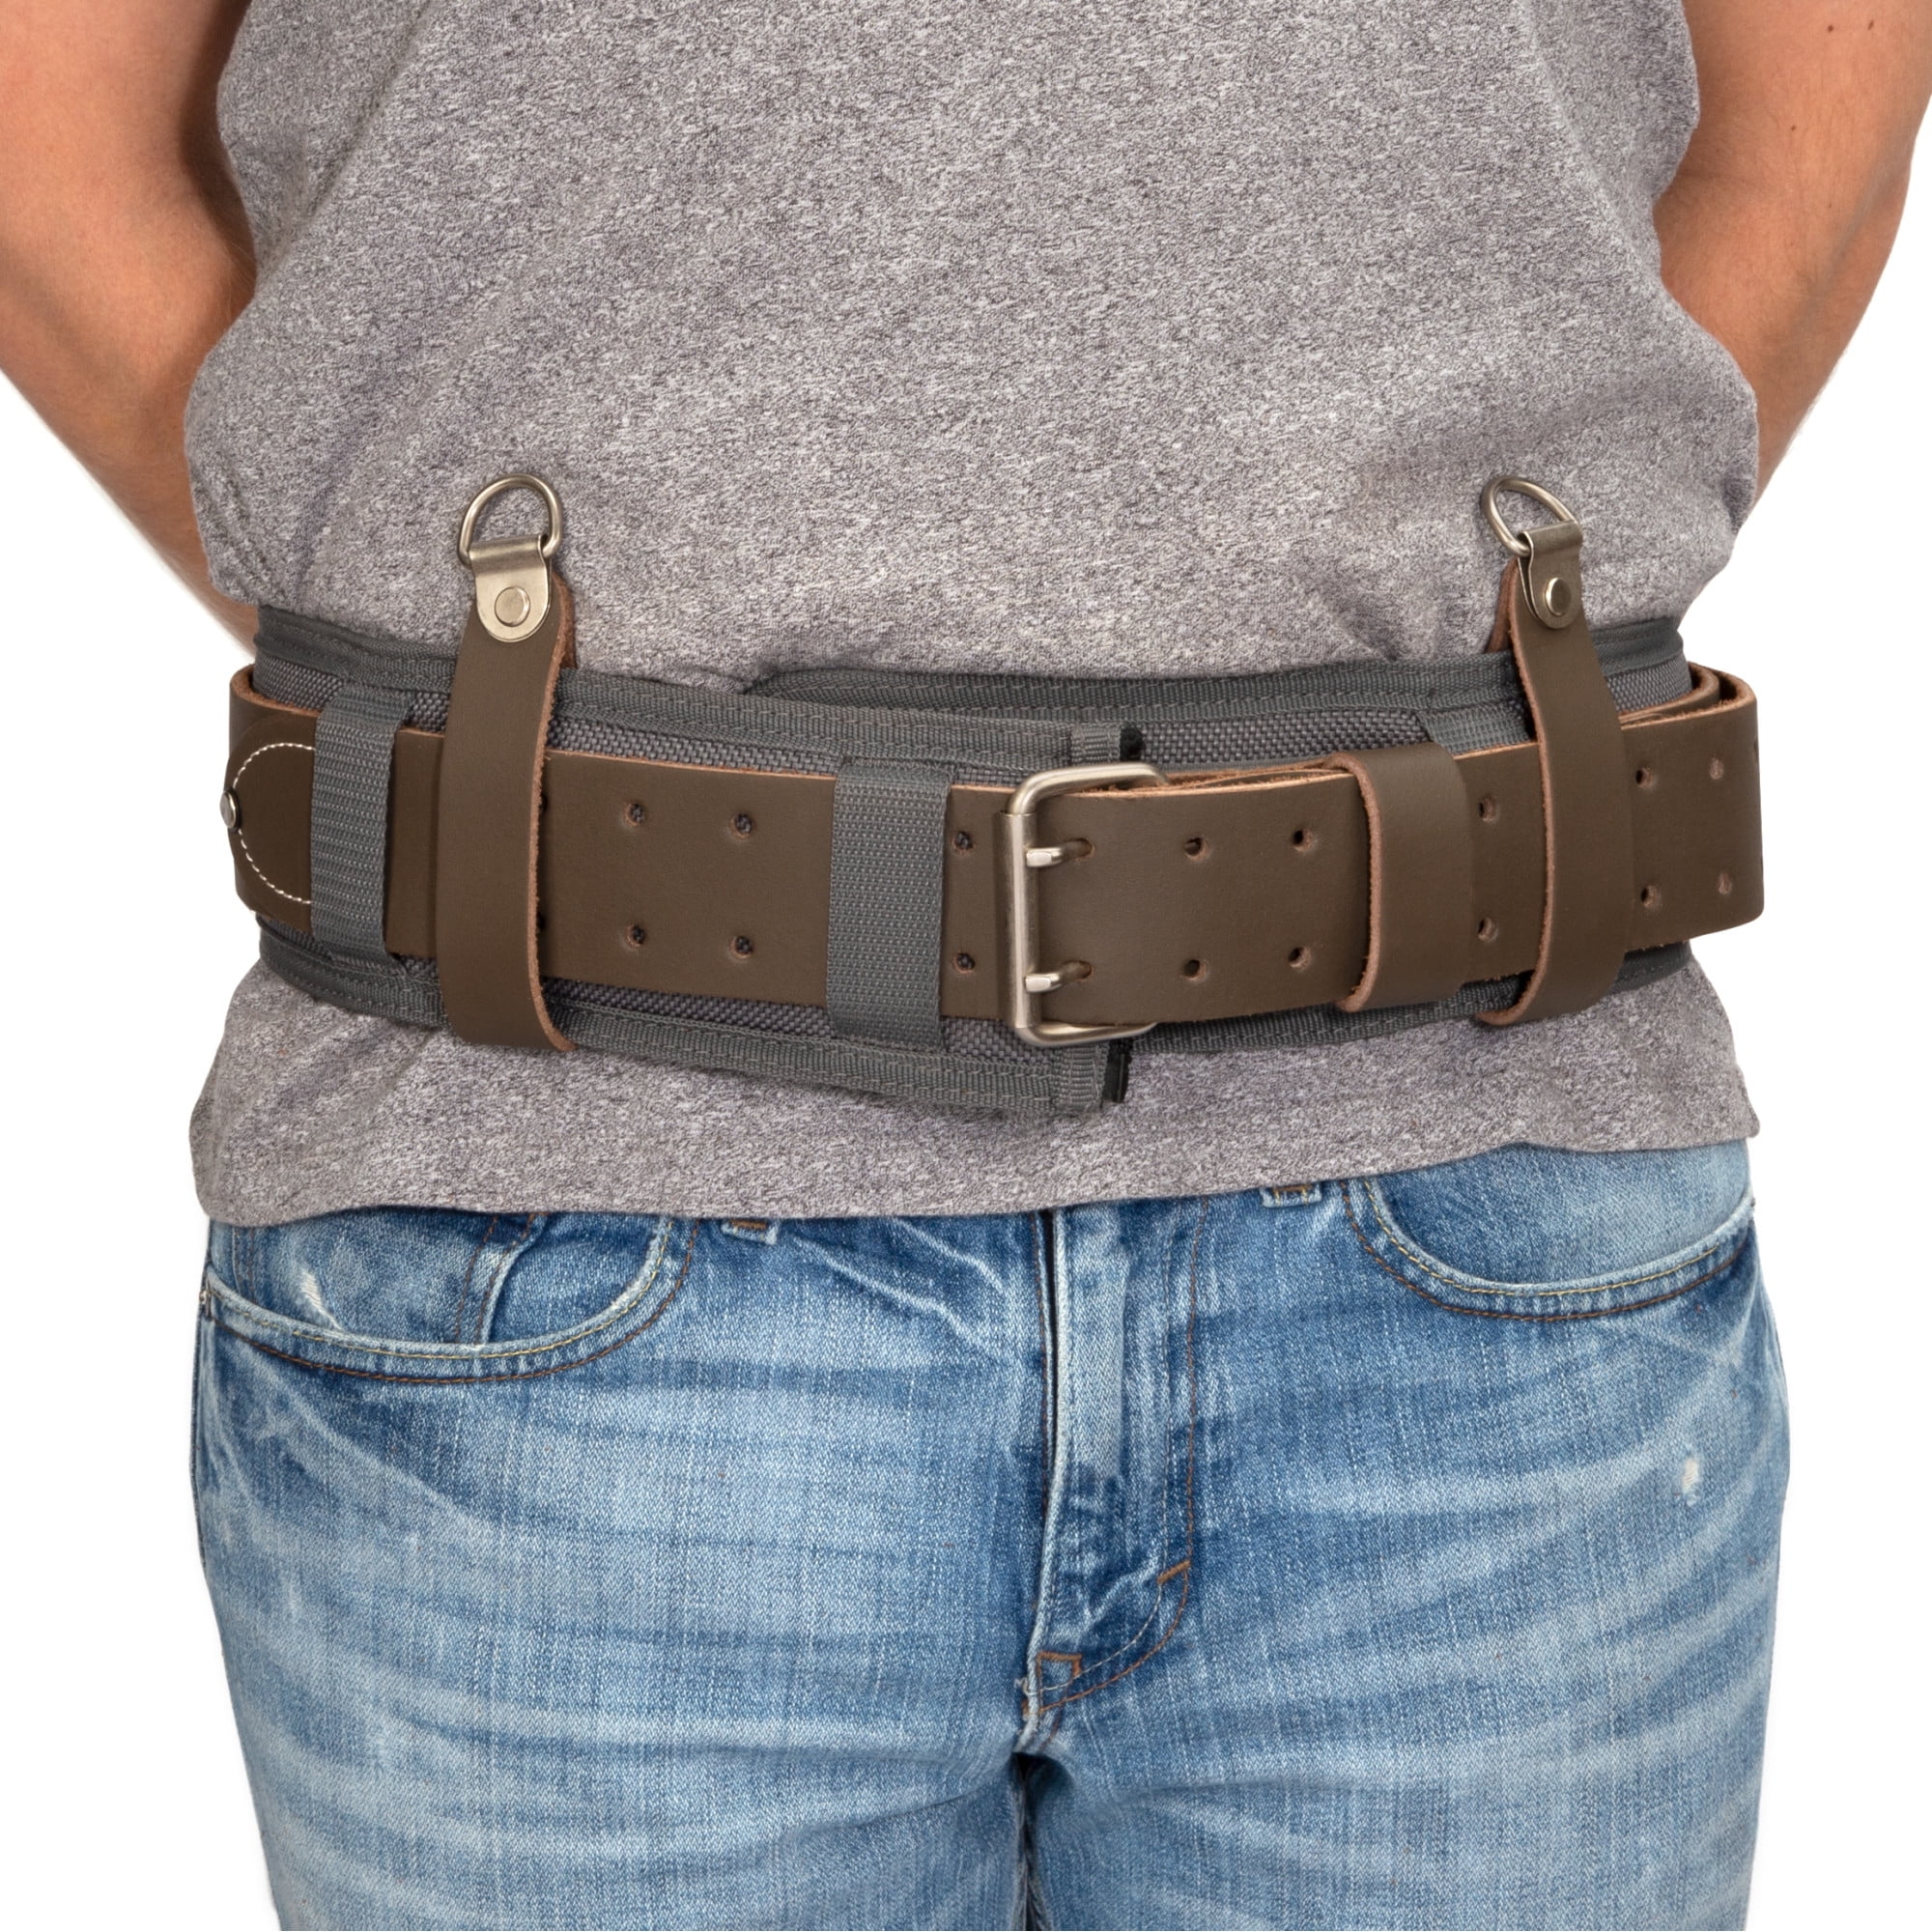 Estwing 94757 6 inch Padded Leather Work Belt for sale online 